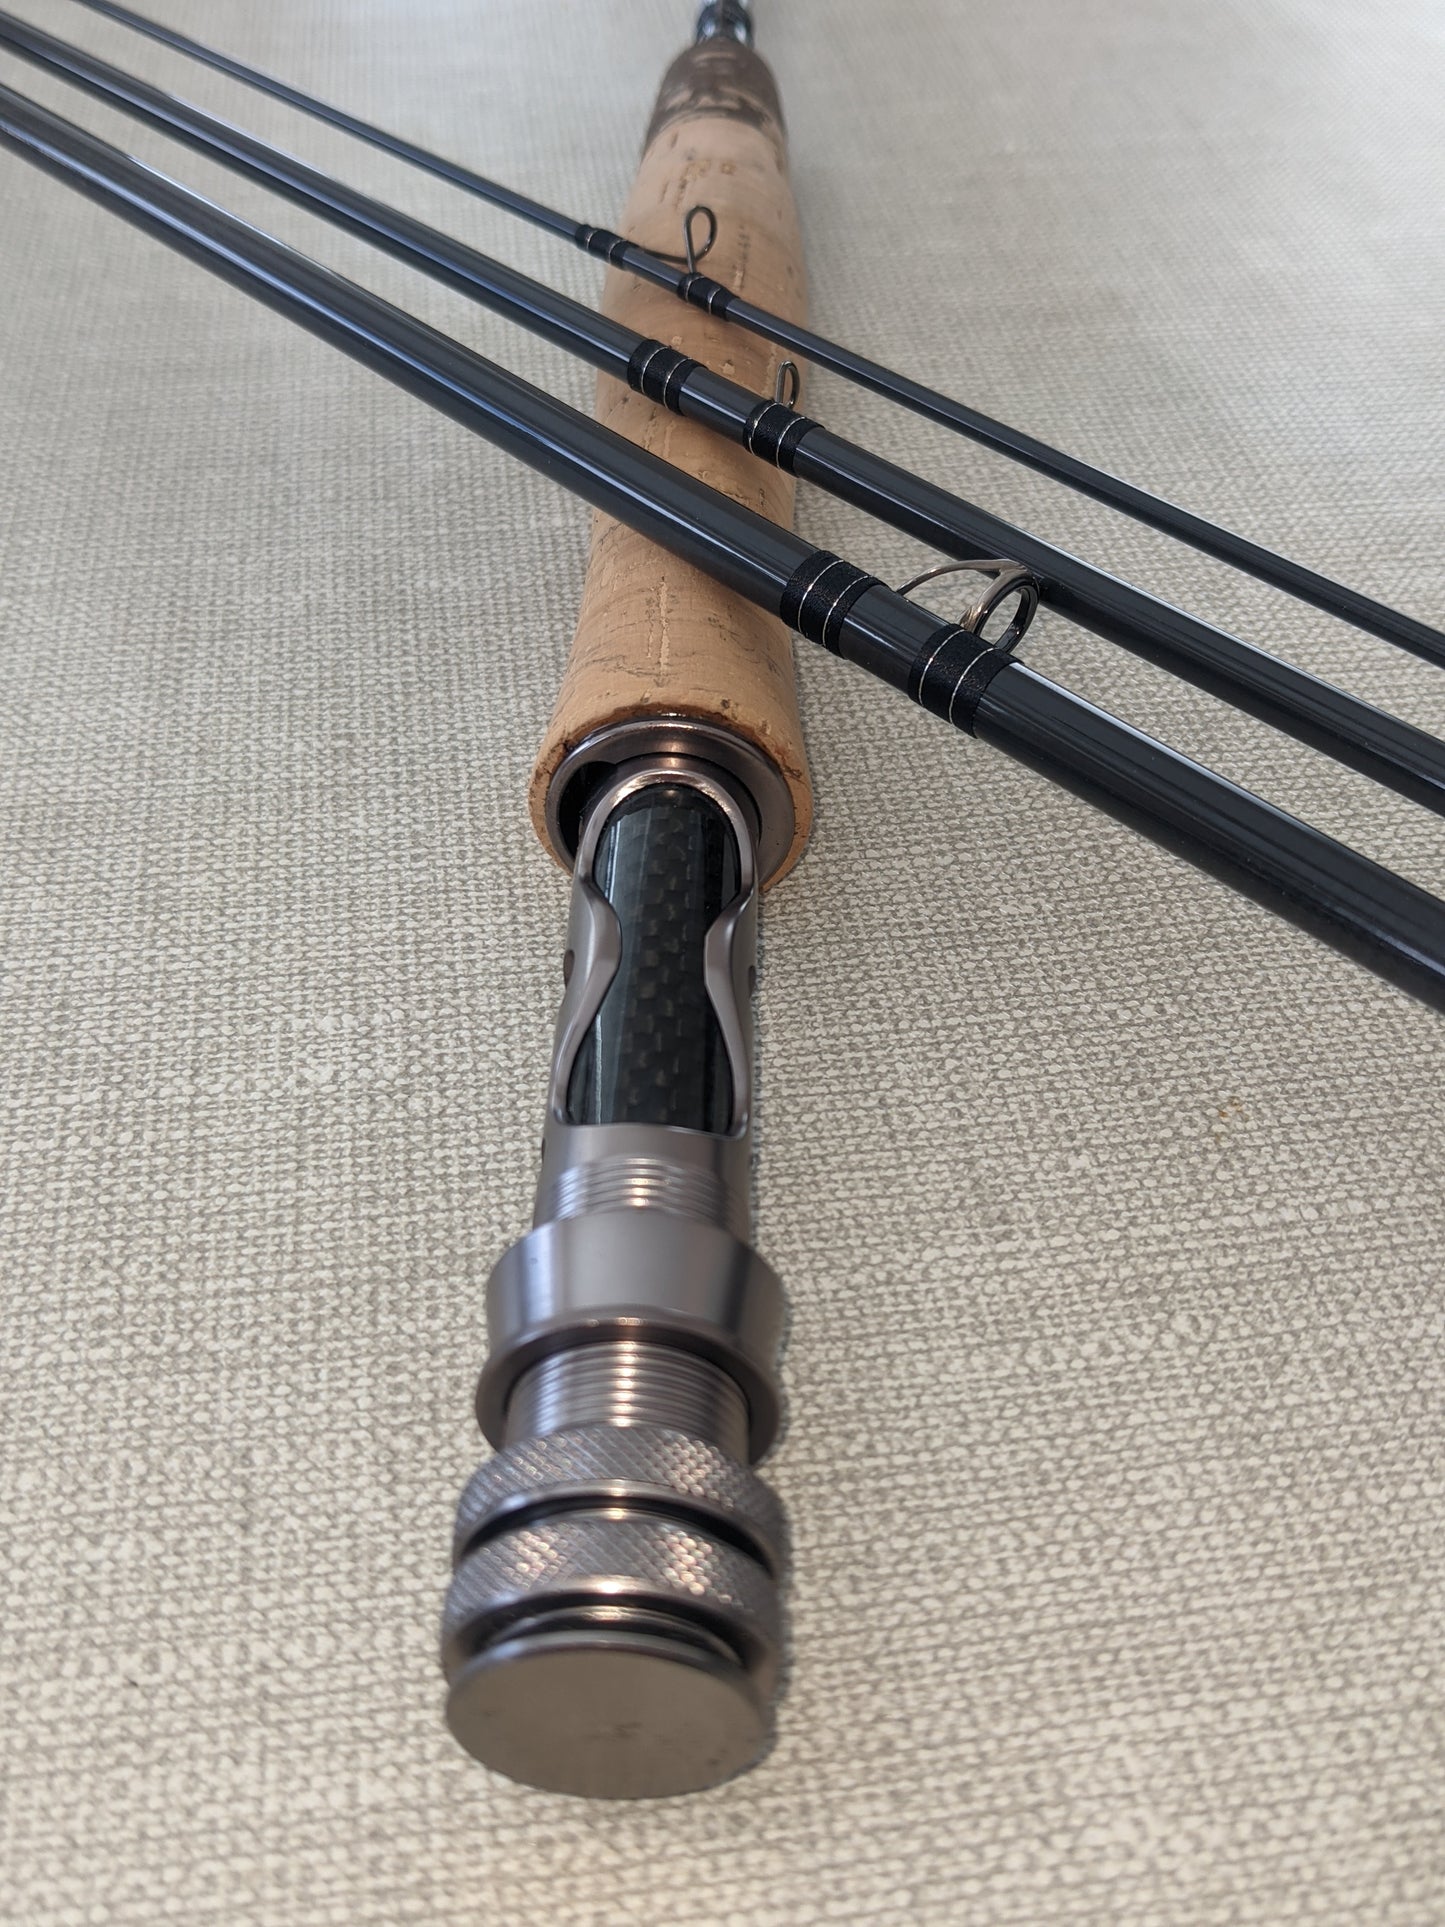 5WT 9'0" 2 piece Fly Rod - Moderate Fast Action